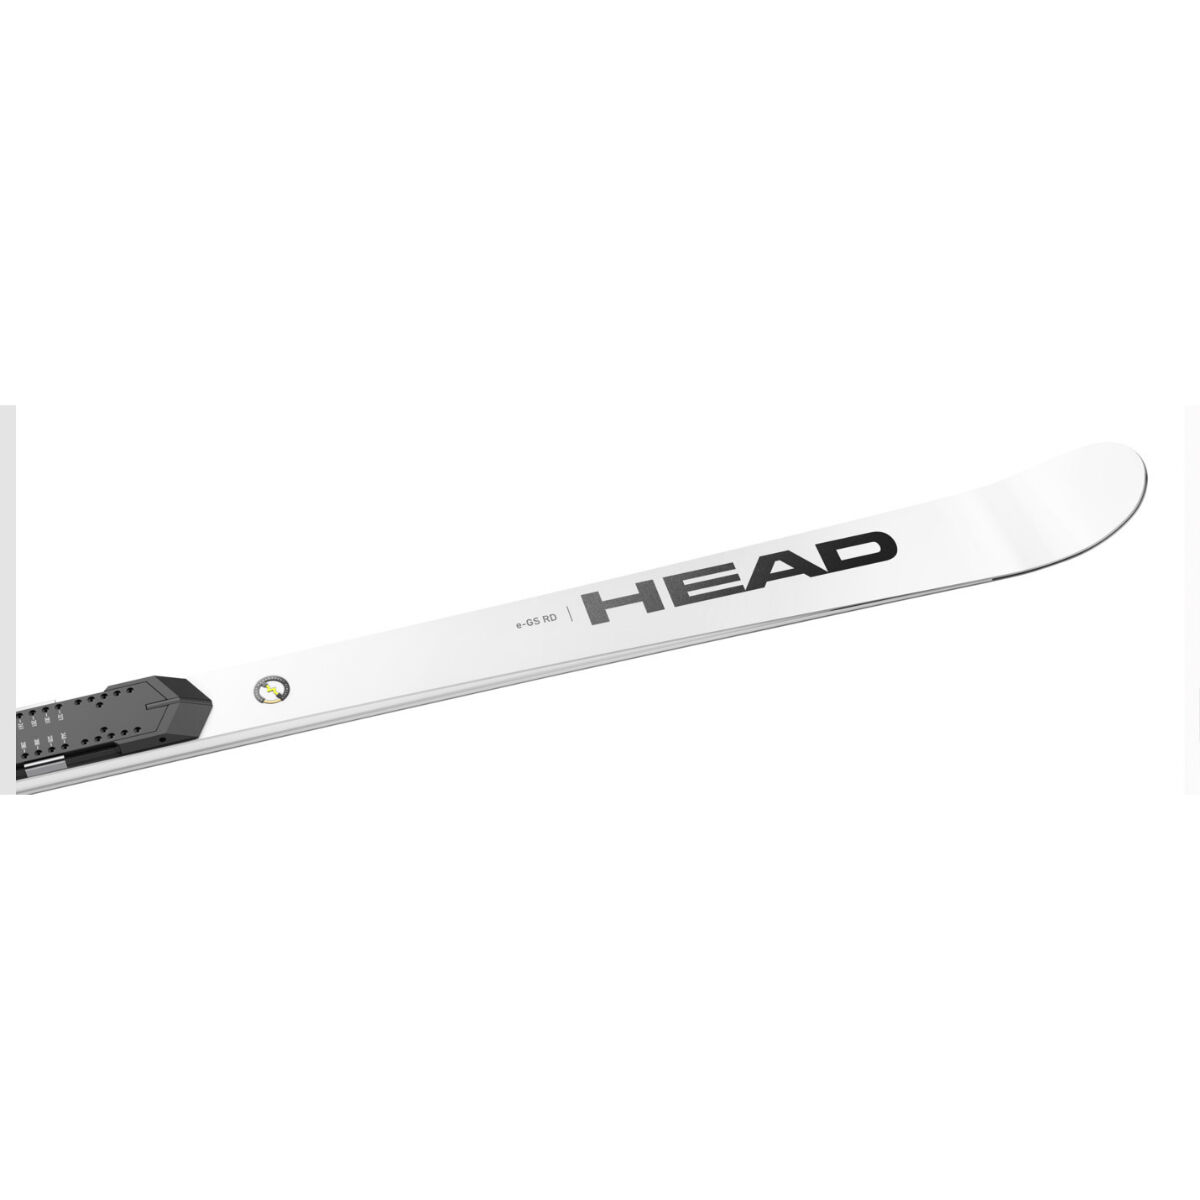 Head World Cup Rebels e-GS RD FIS Skis w/WCR 14 Plates | Christy